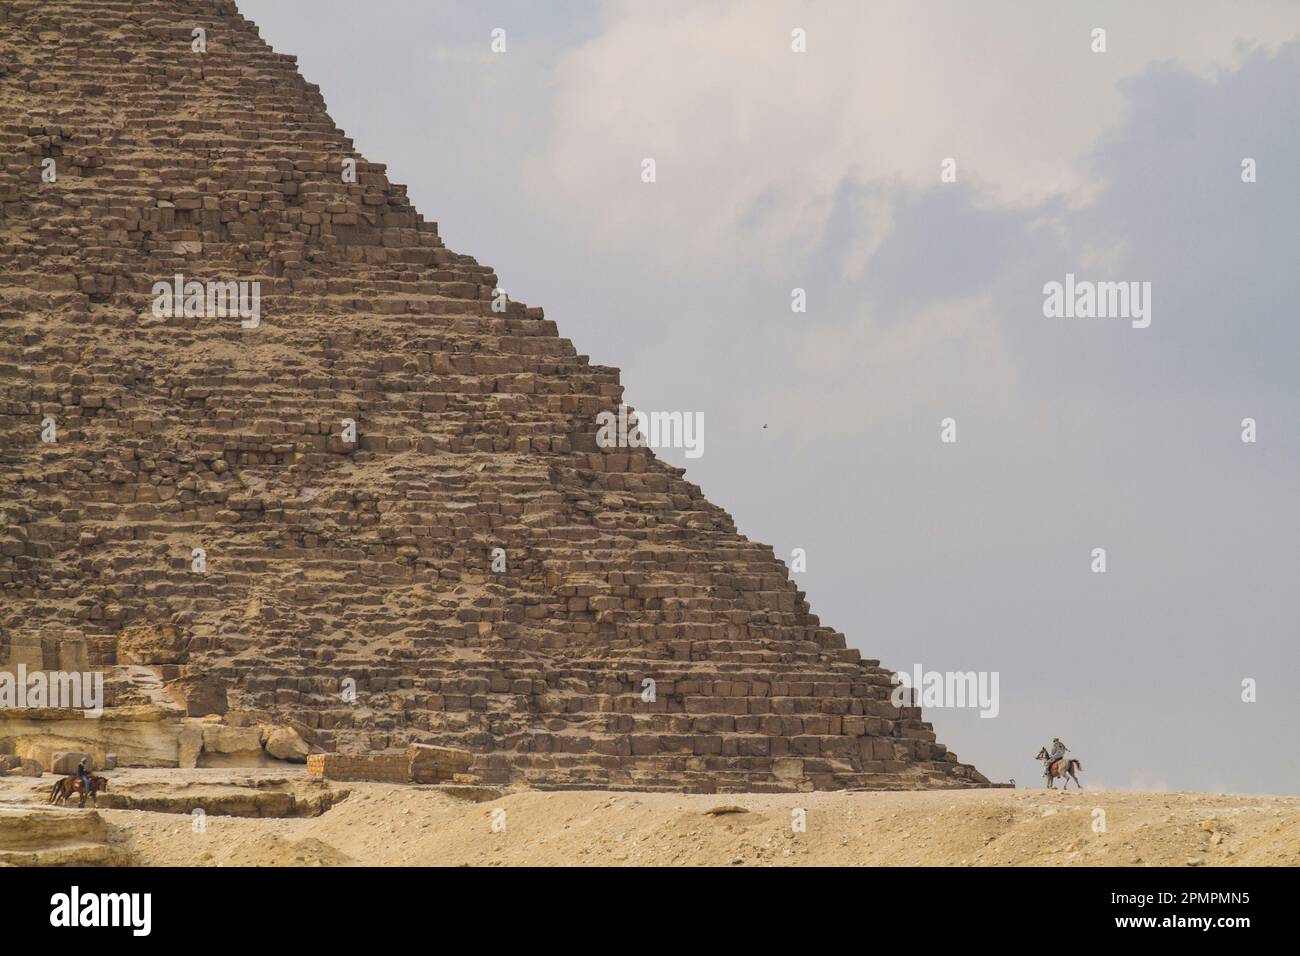 The Great Pyramid of Giza in Egypt; Cairo, Egypt Stock Photo